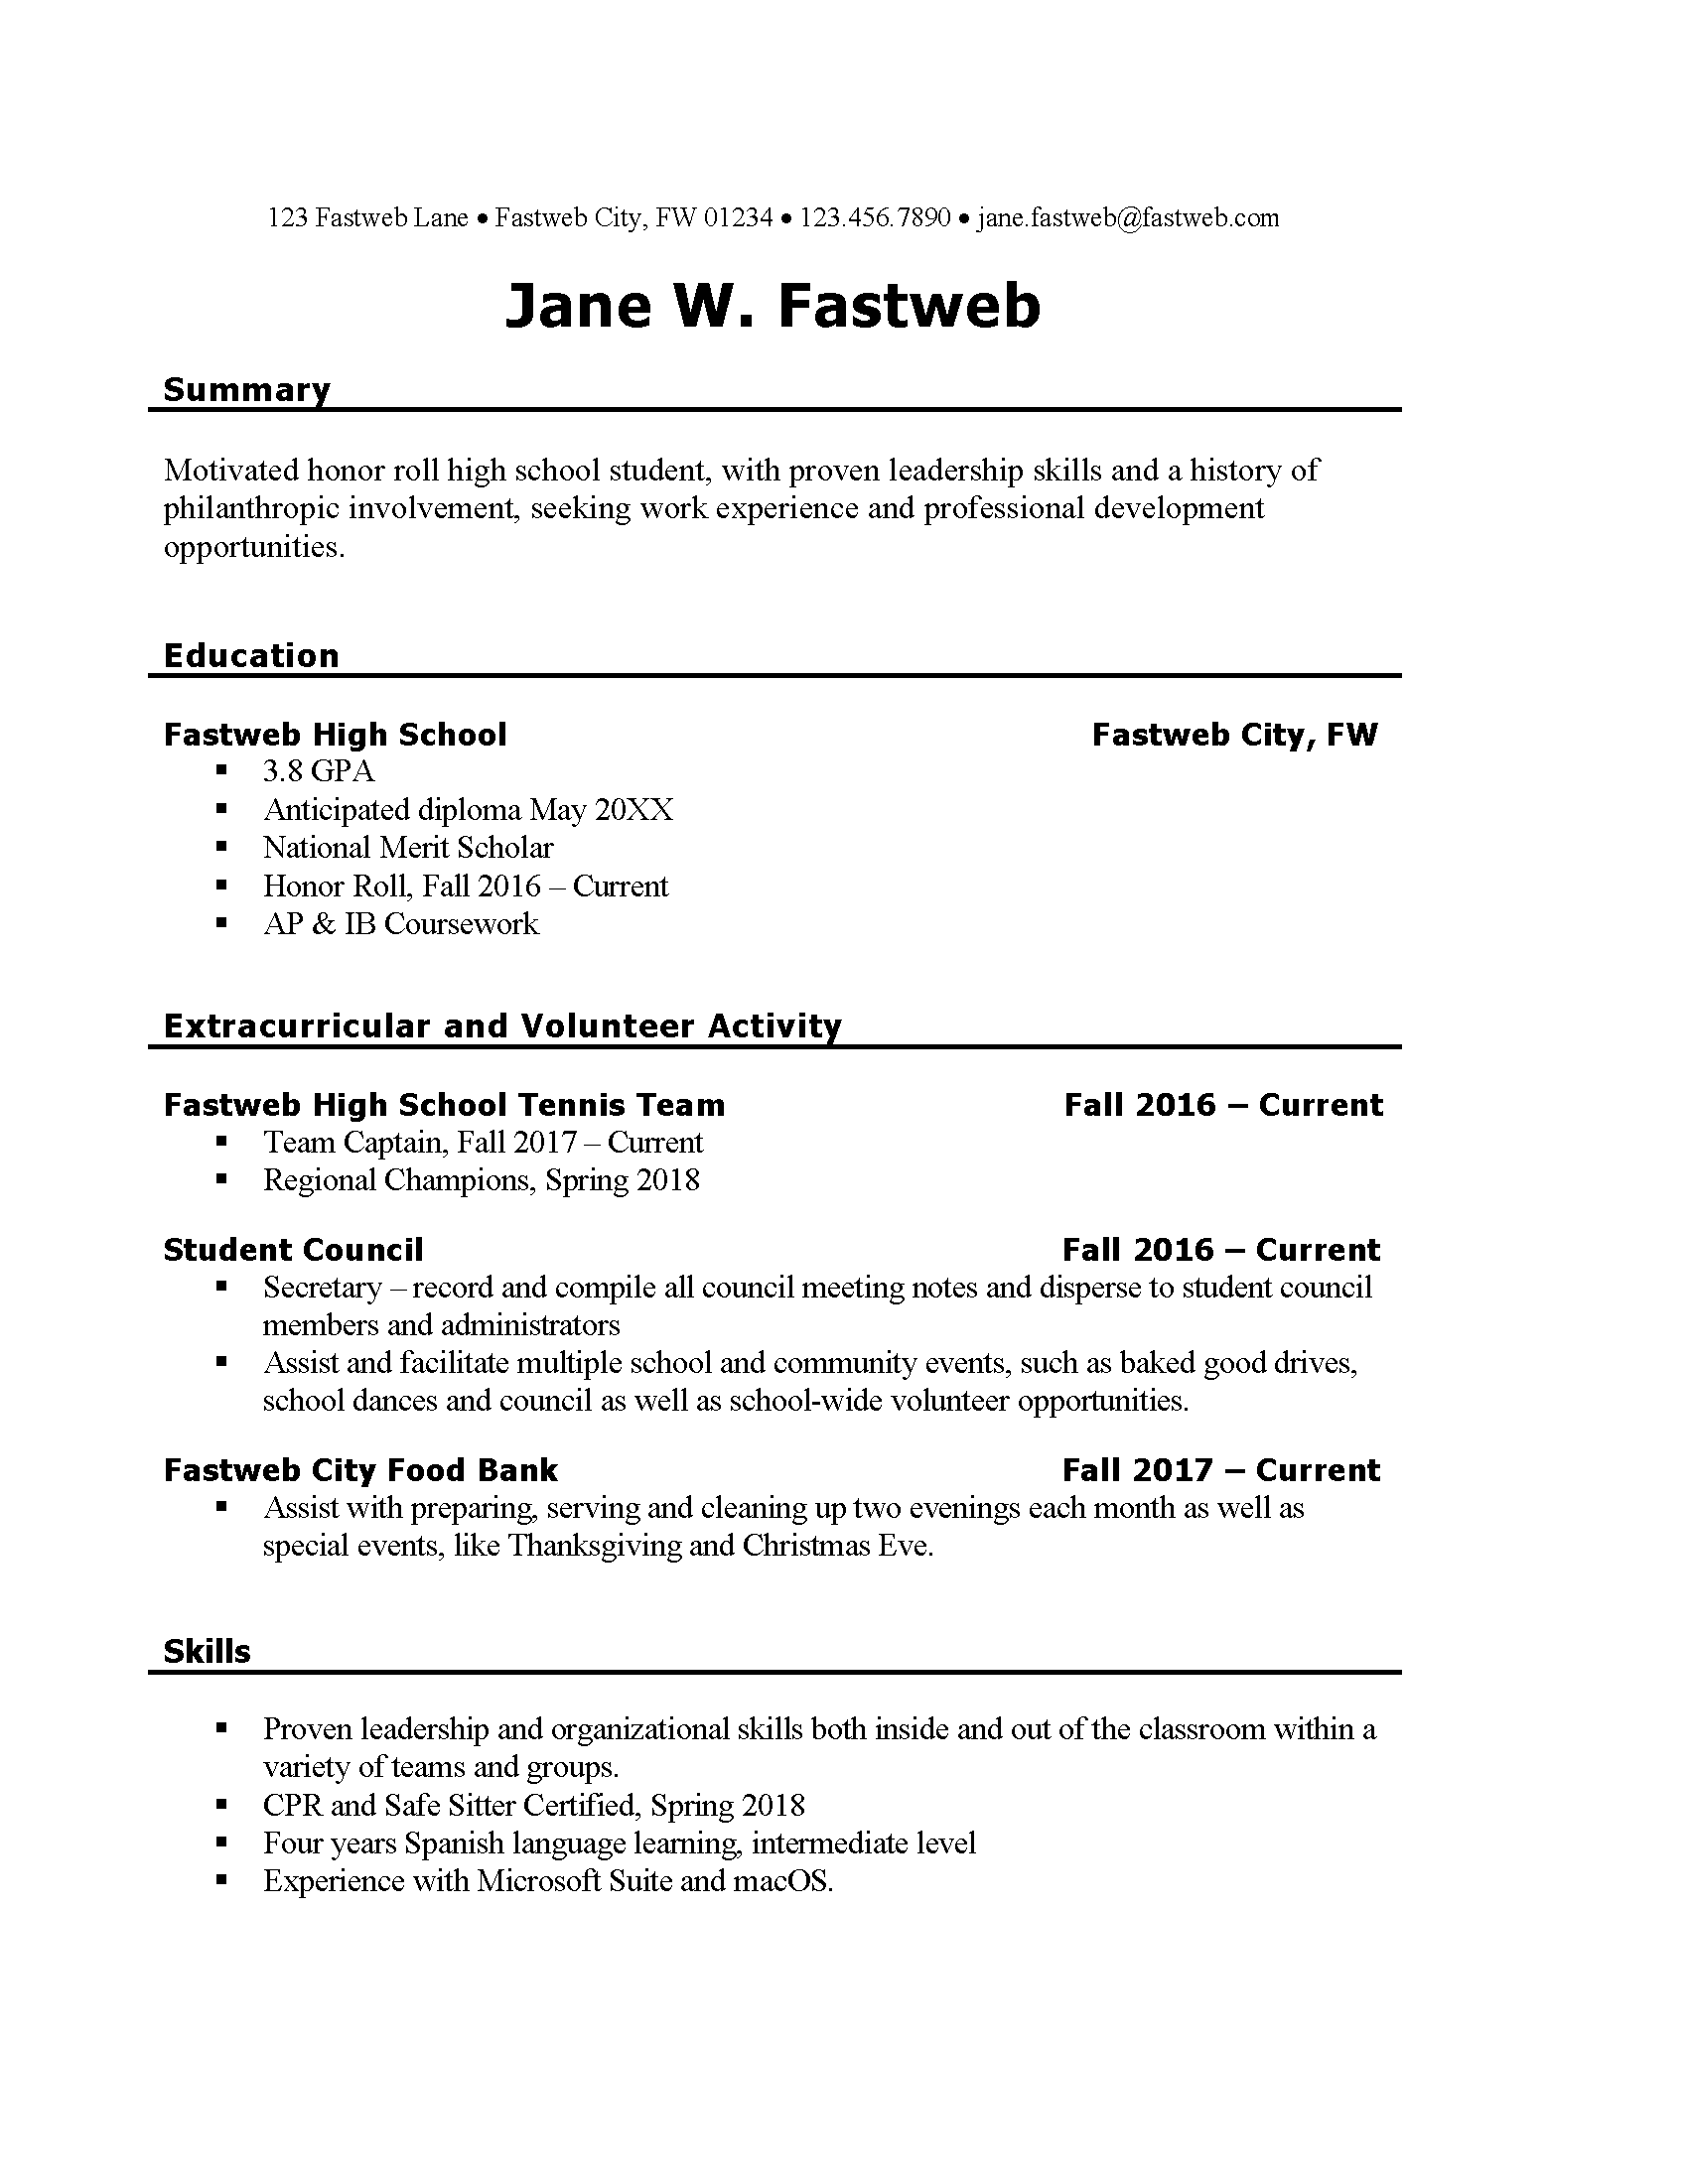 resume objective for high school student first job